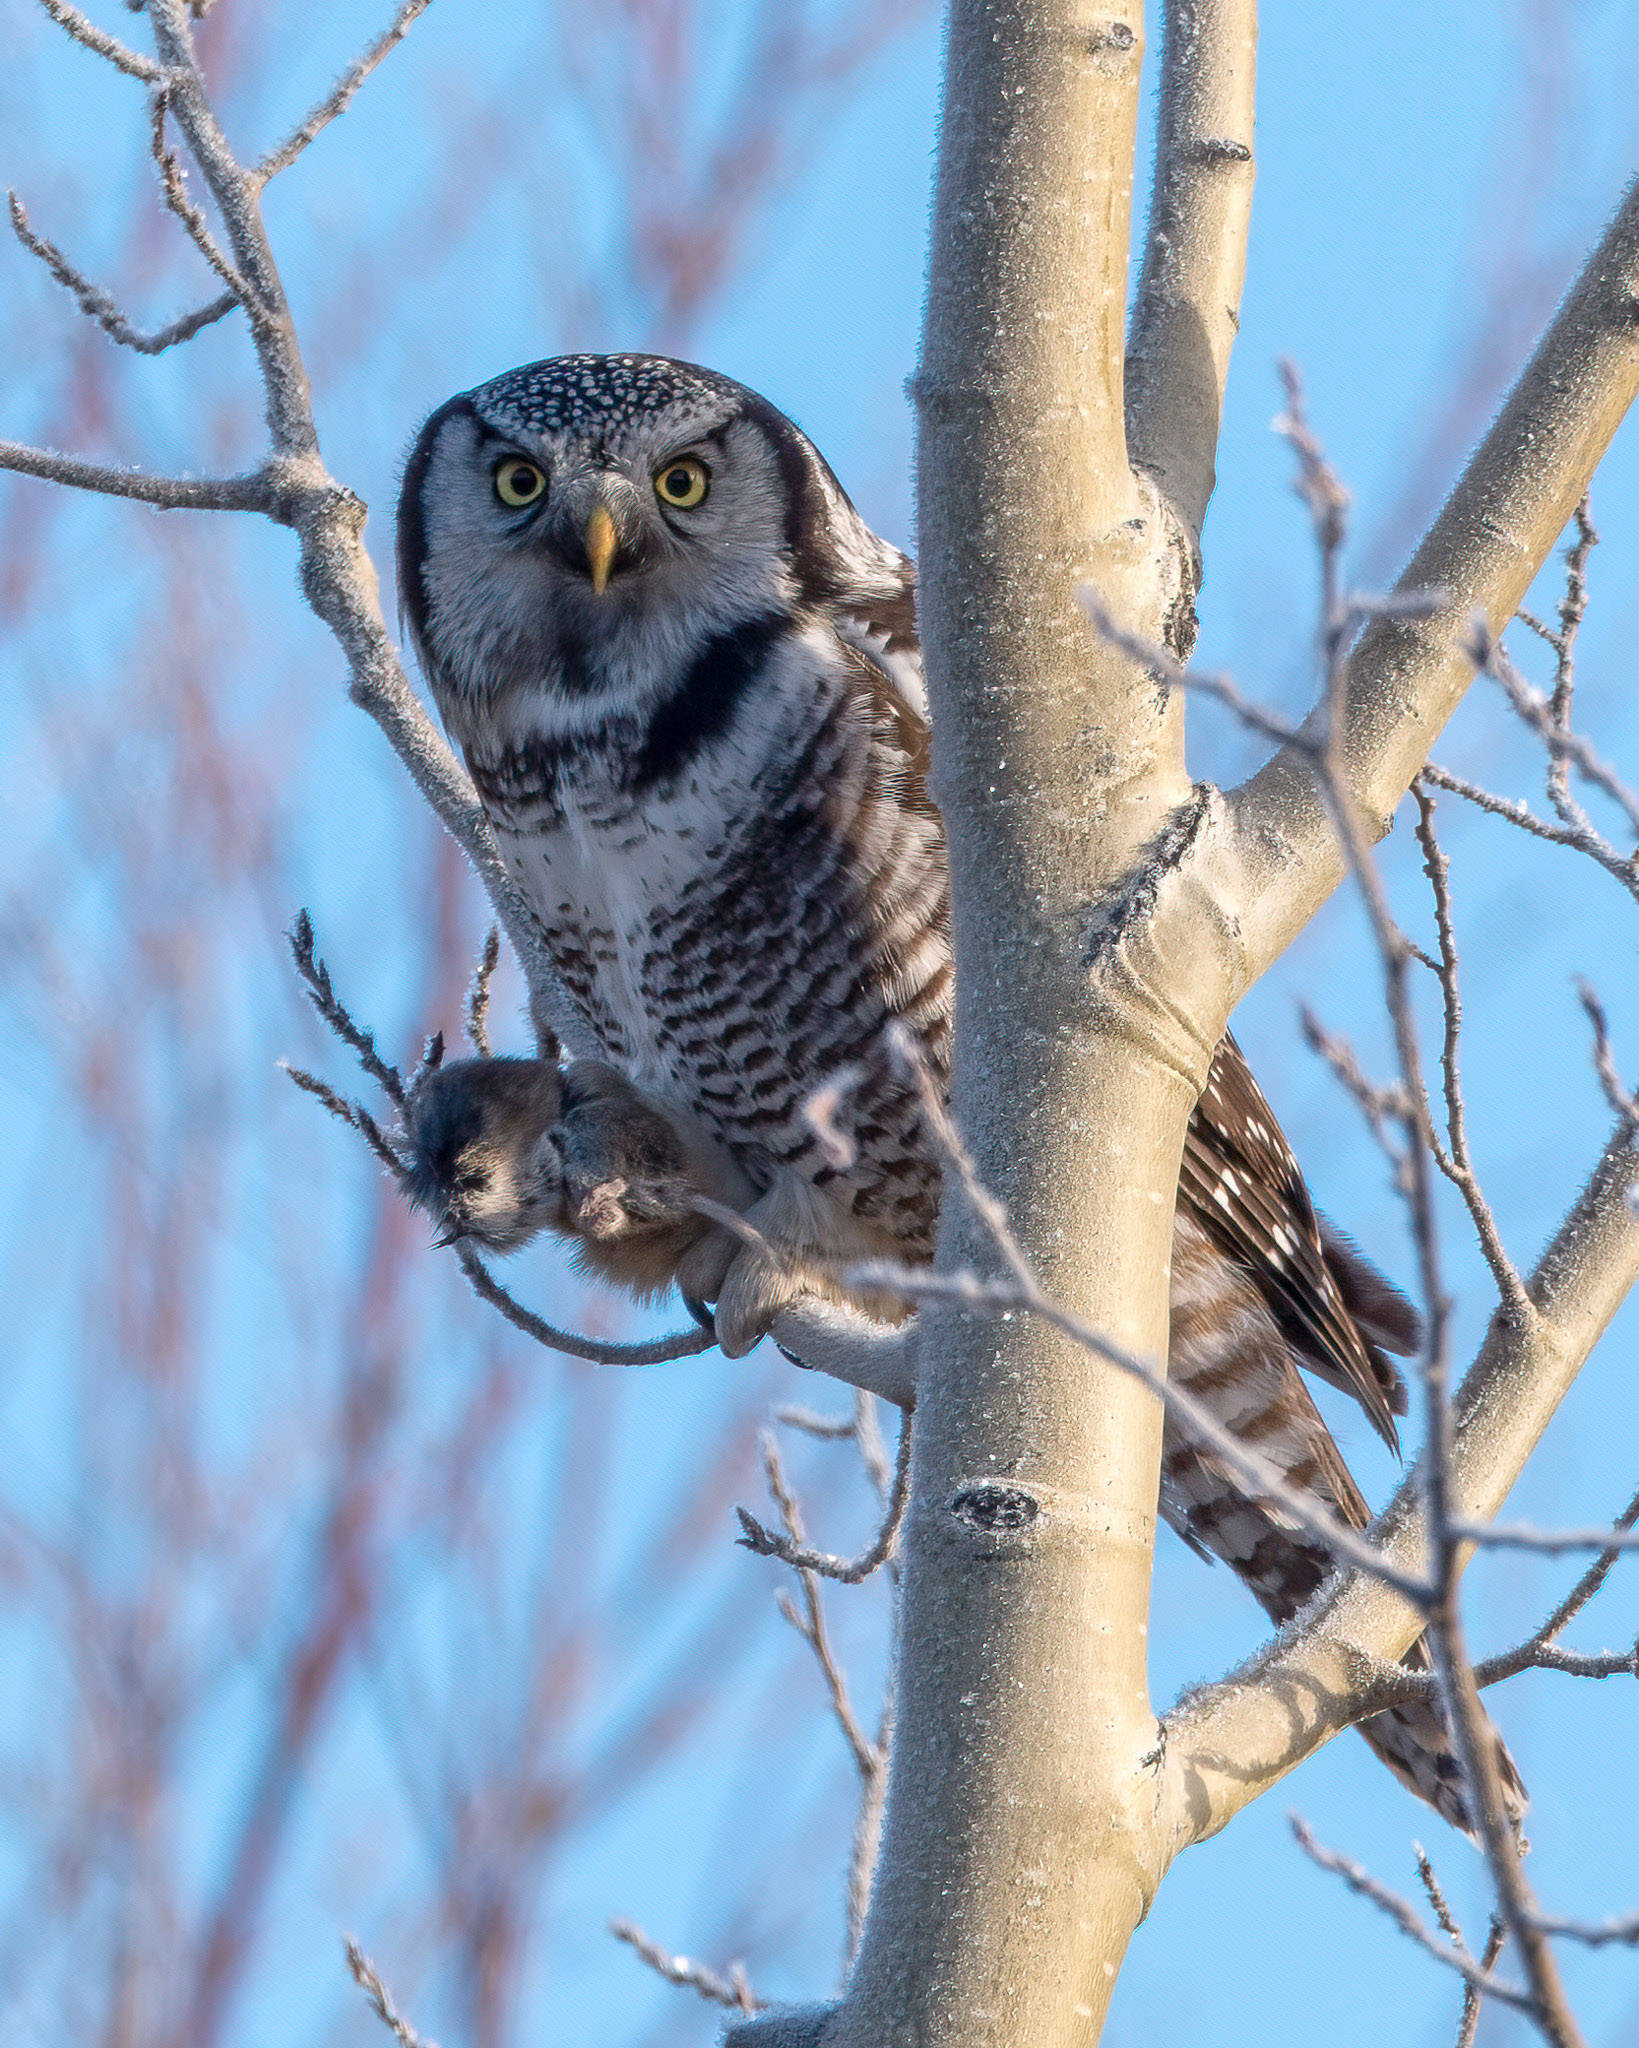 A Northern Hawk Owl clutching a red-backed vole near Watson Lake on Nov. 30, 2020. (Photo by Colin Canterbury/USFWS)